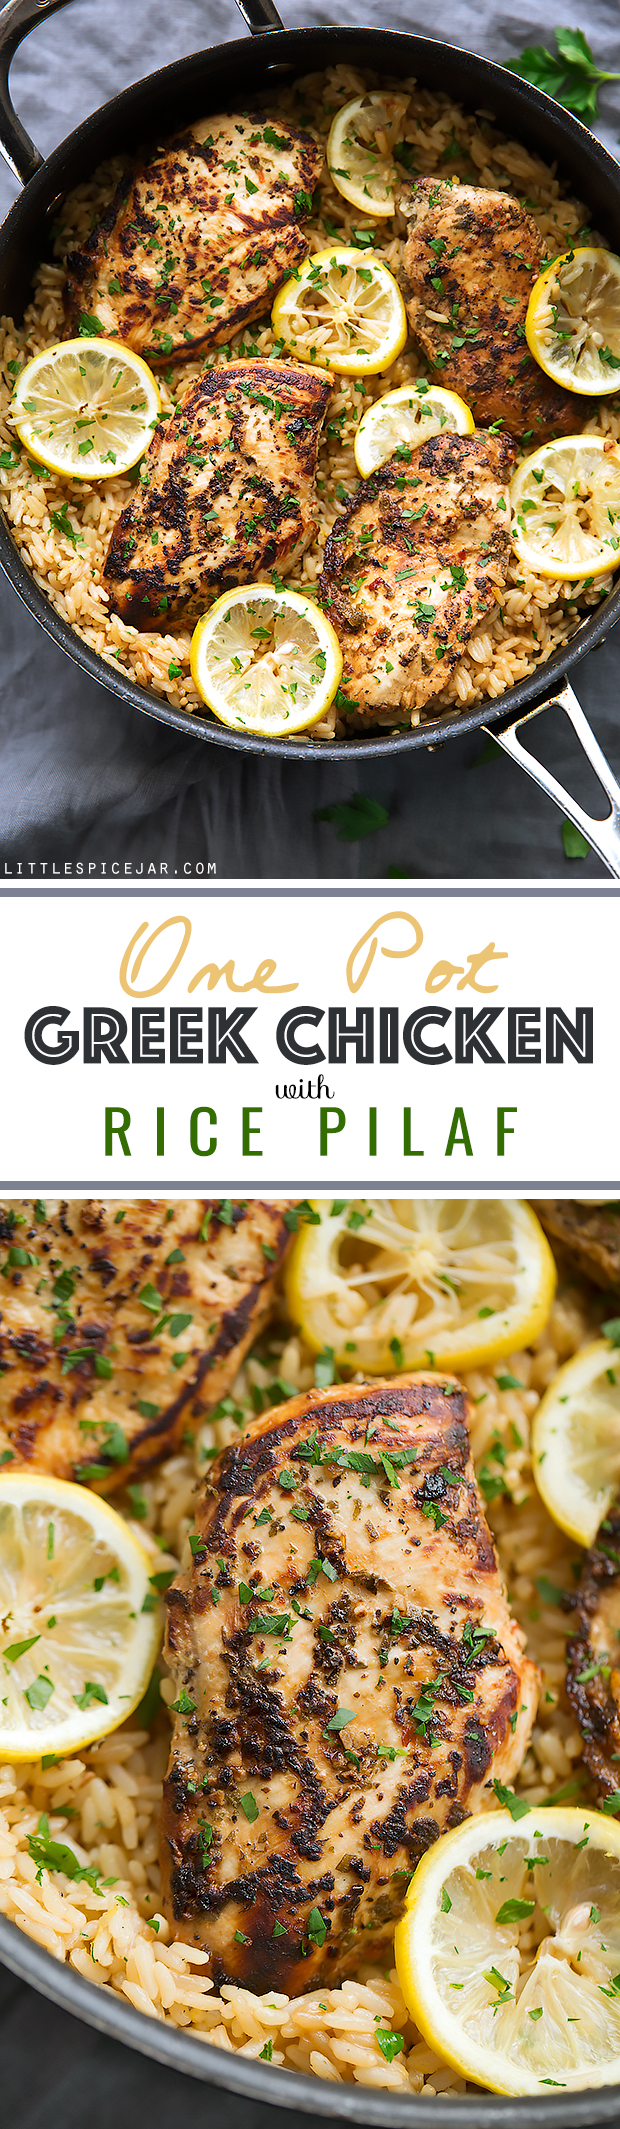 One-Pot-Greek-Chicken-with-Rice-Pilaf-7